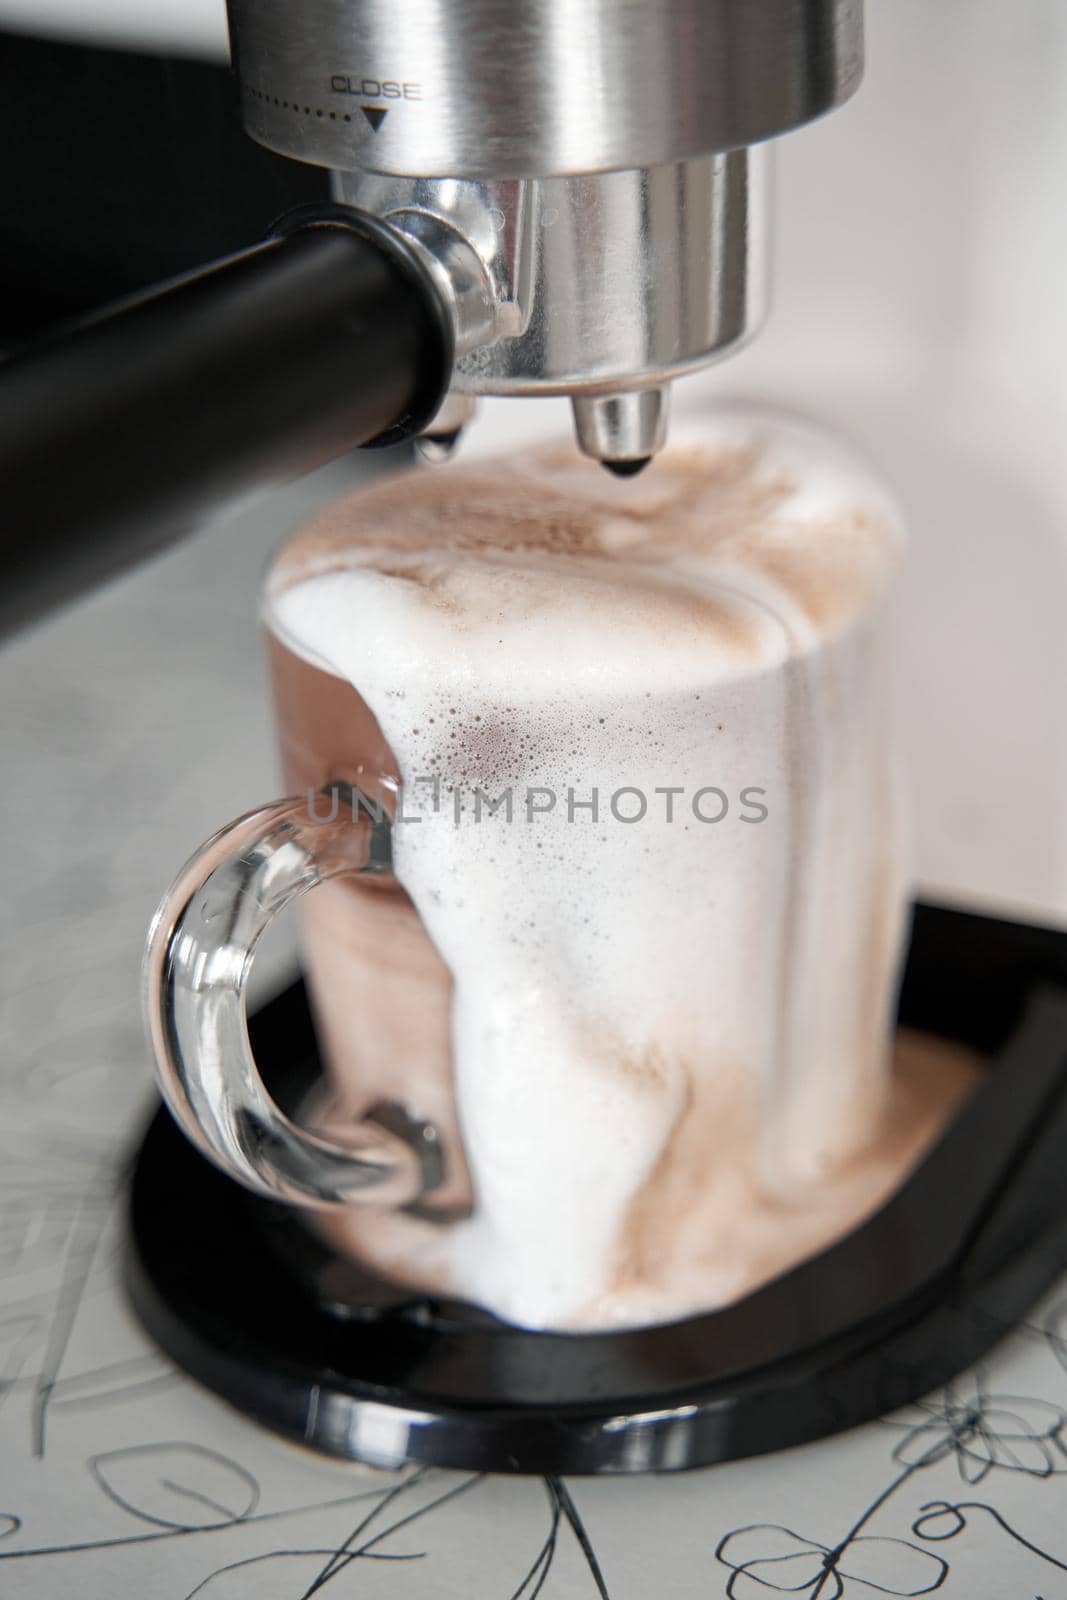 Coffee machine overfilled cup with coffee close up.